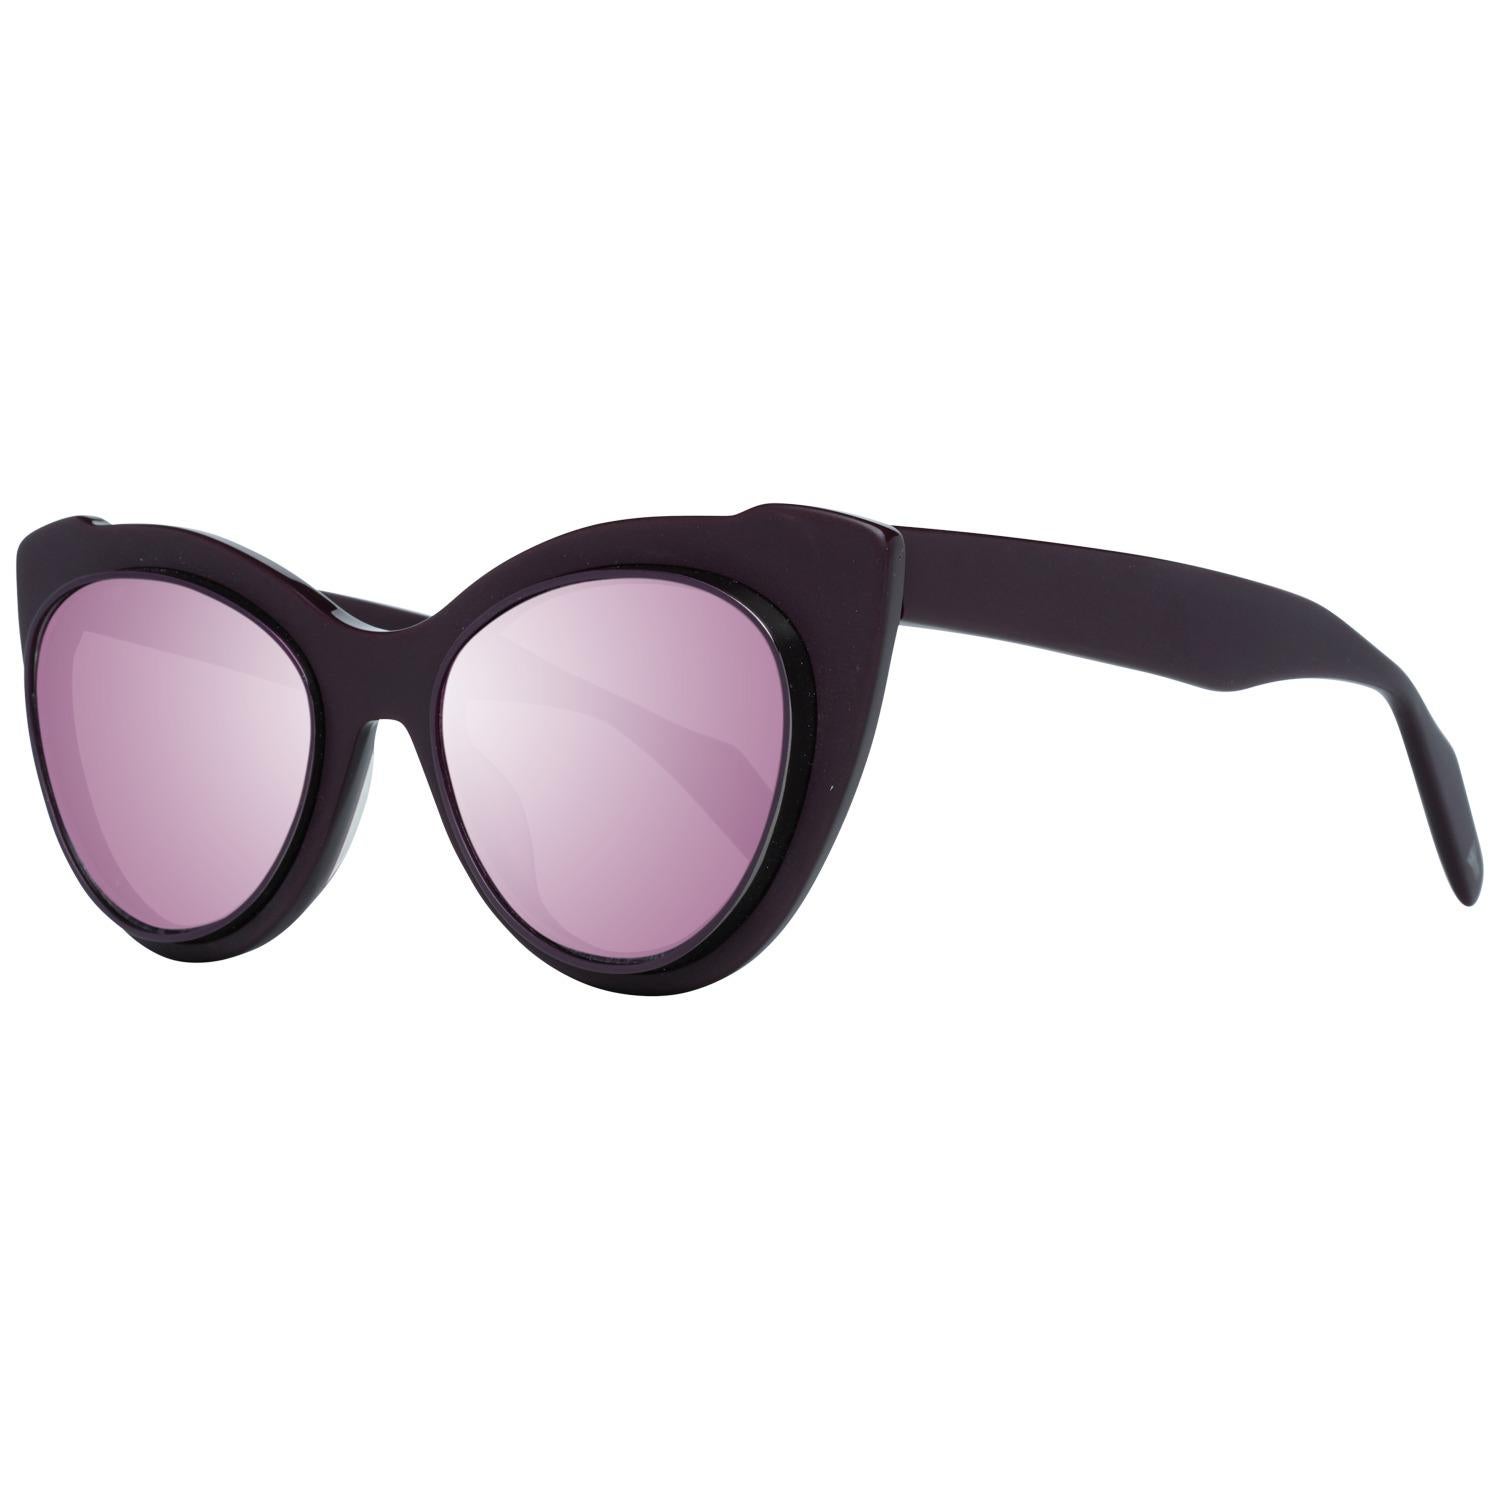 Details
MATERIAL: Acetate
COLOR: Purple
MODEL: YY7021 52771
GENDER: Women
COUNTRY OF MANUFACTURE: Japan
TYPE: Sunglasses
ORIGINAL CASE?: Yes
STYLE: Cats Eyes
OCCASION: Casual
FEATURES: Lightweight
LENS COLOR: Purple
LENS TECHNOLOGY: No Extra
YEAR